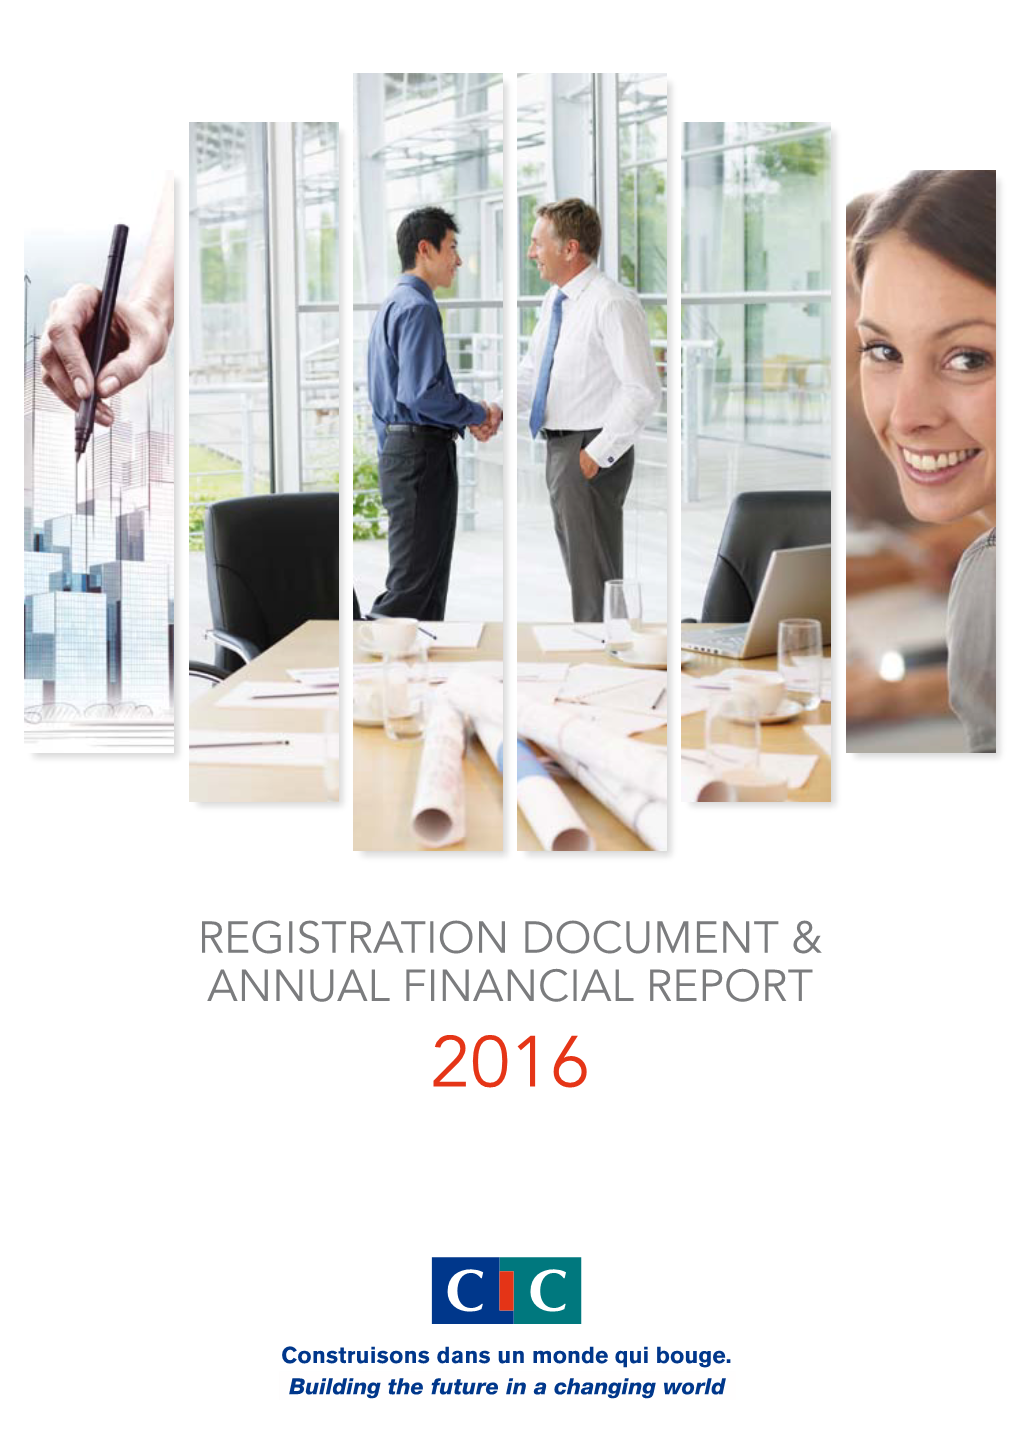 Registration Document & Annual Financial Report